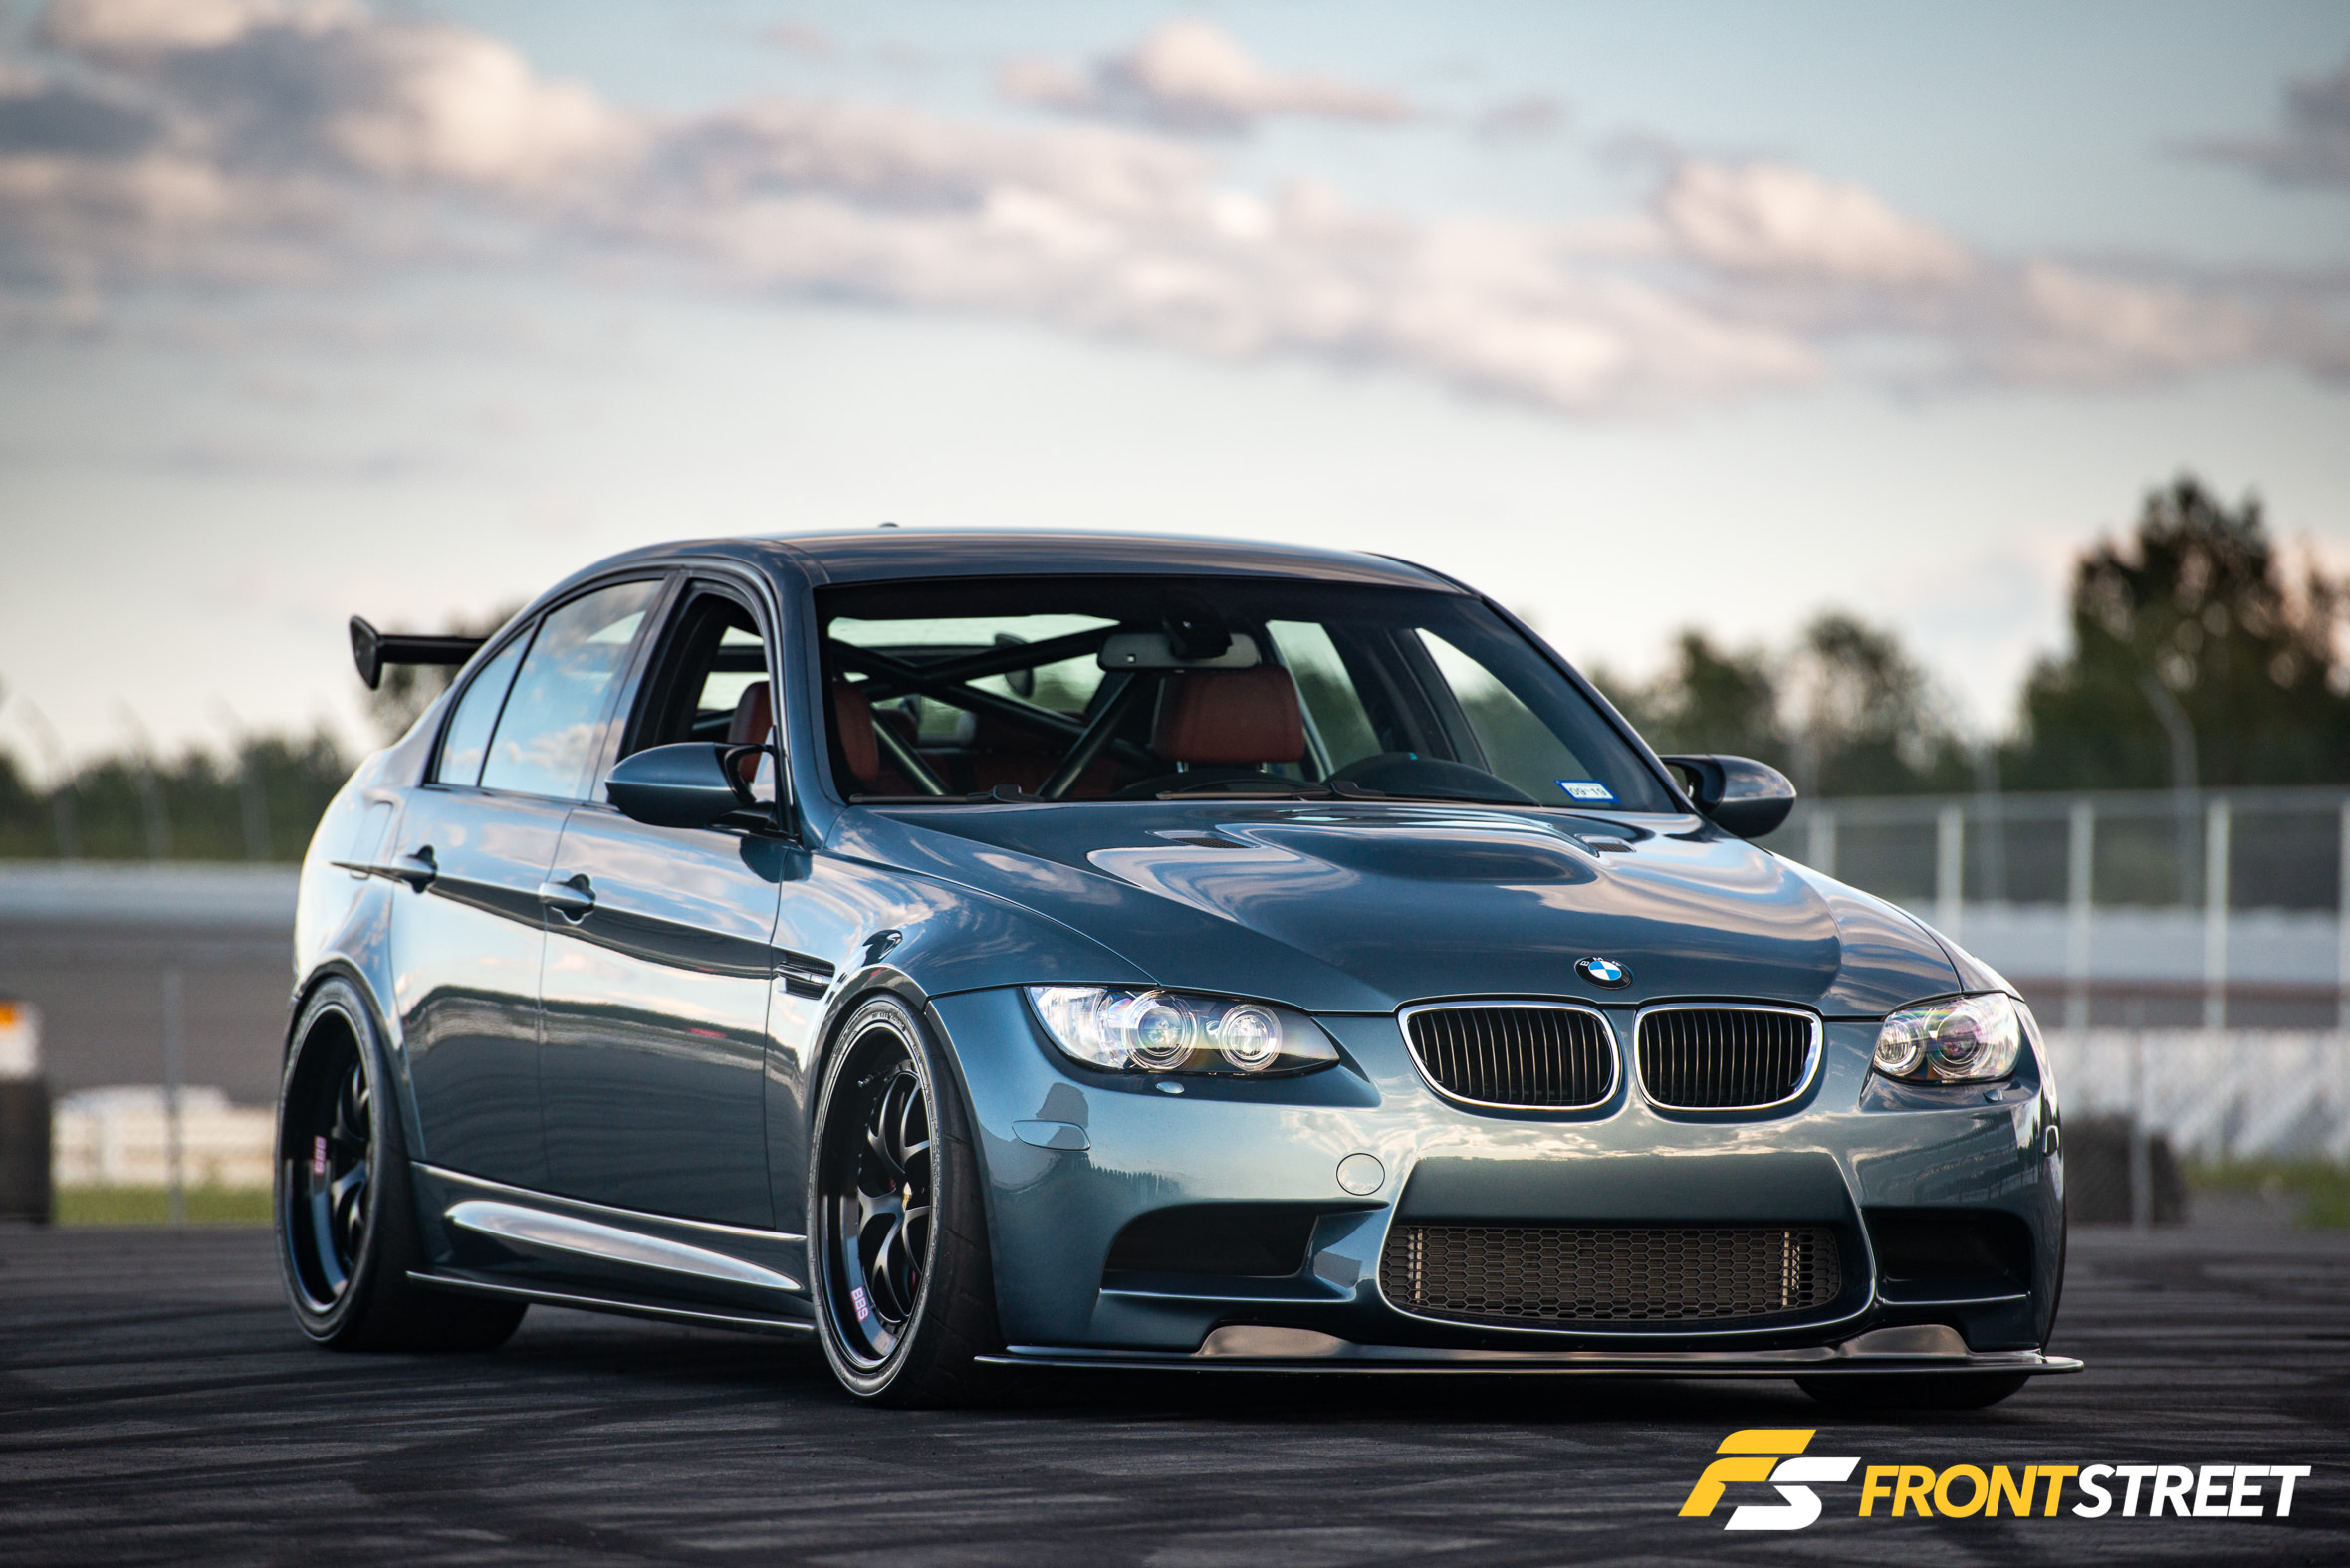 Thinkin' Of A Master Plan: Mitch Lebron's 1-of-1 Neptune Blue E90 M3